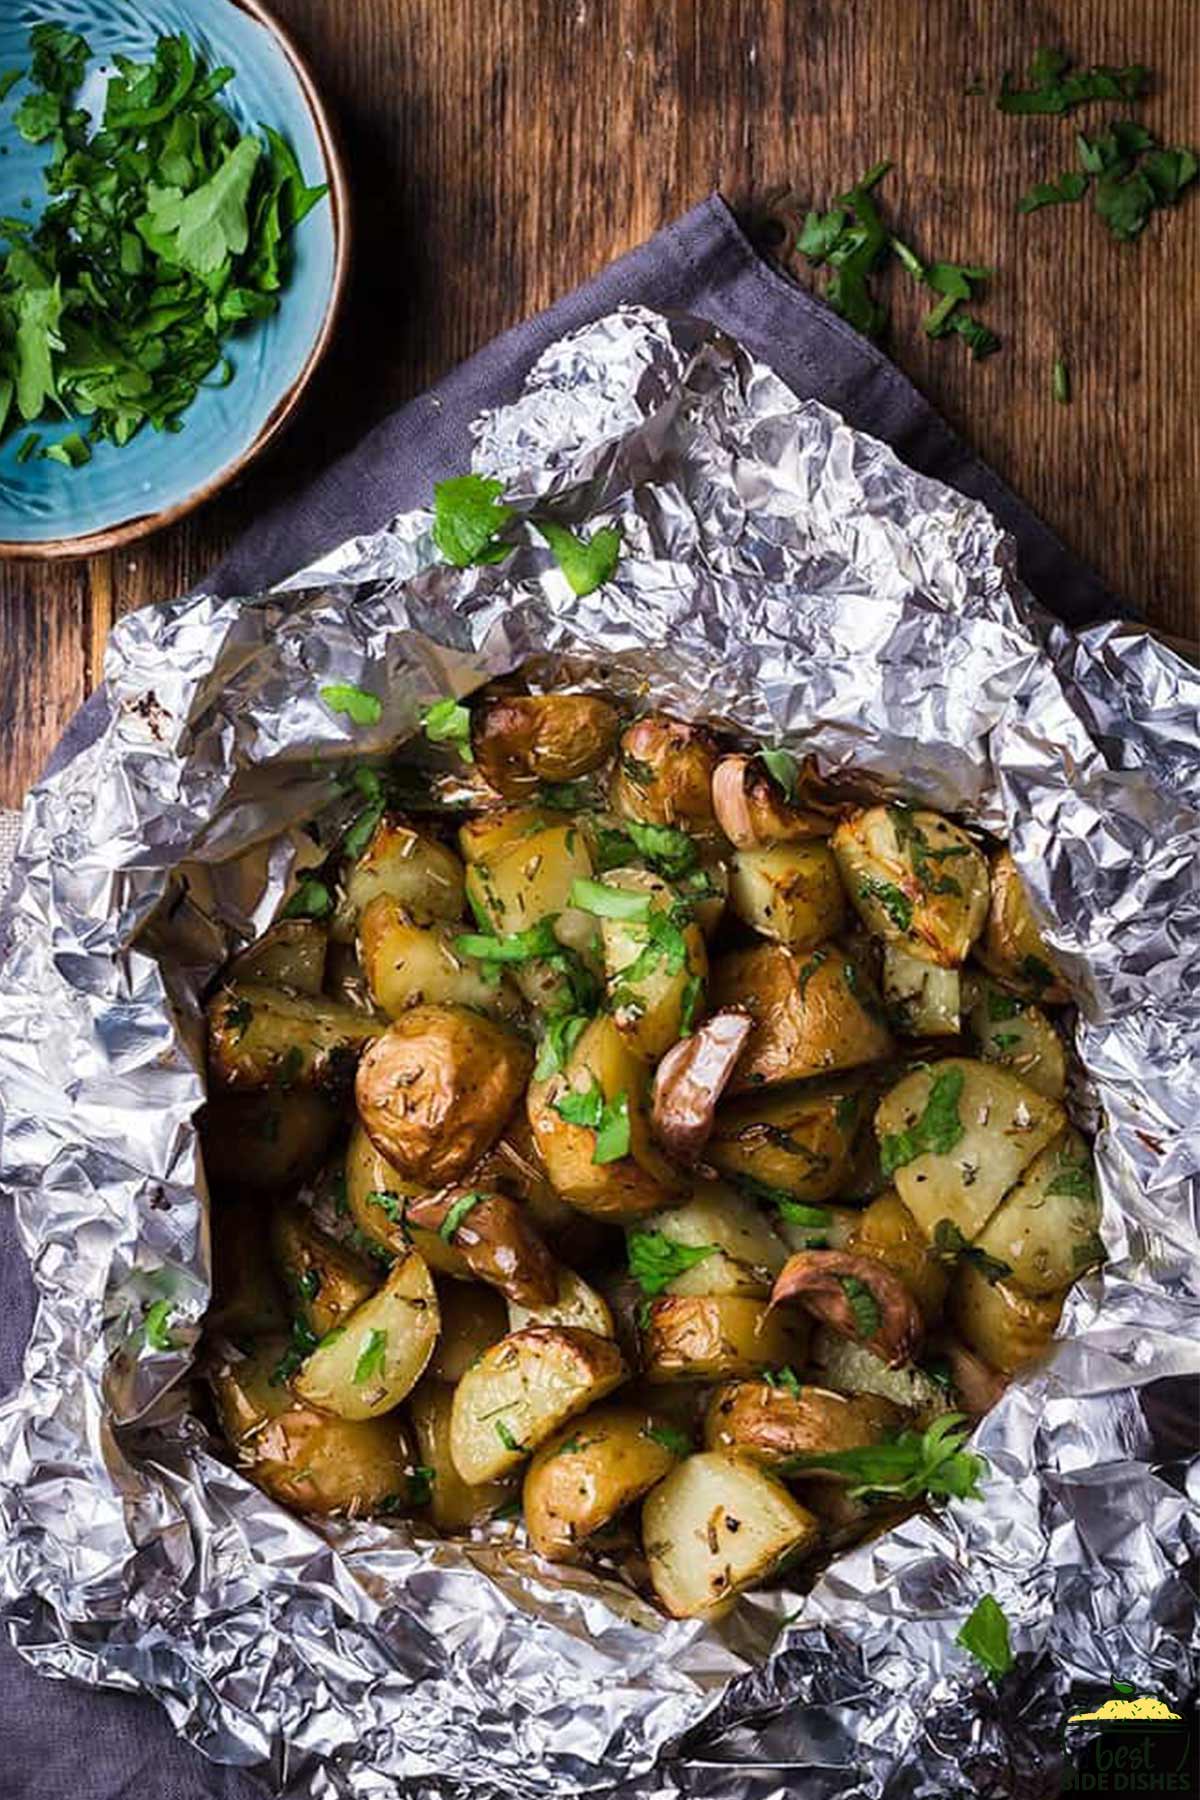 Grilled potatoes in foil with parsley on top